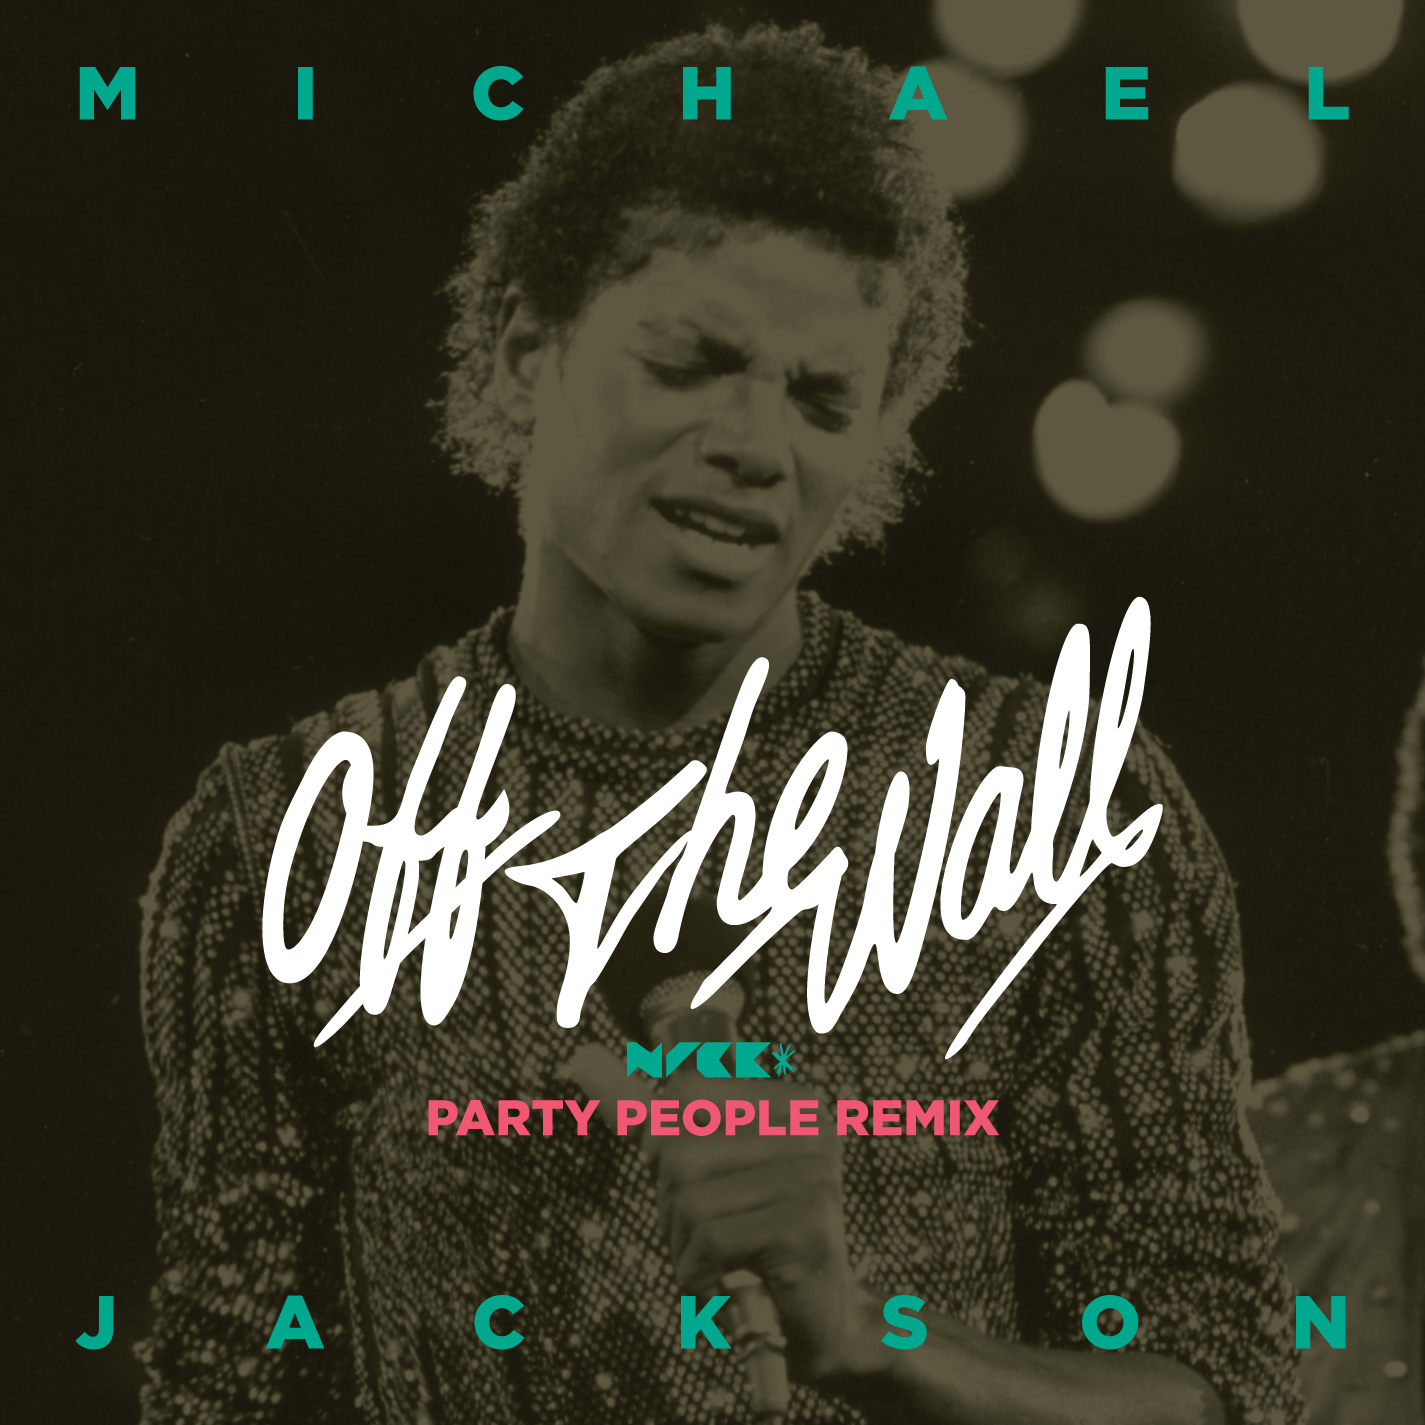 Michael Jackson - Off The Wall Nick* Party People Remix